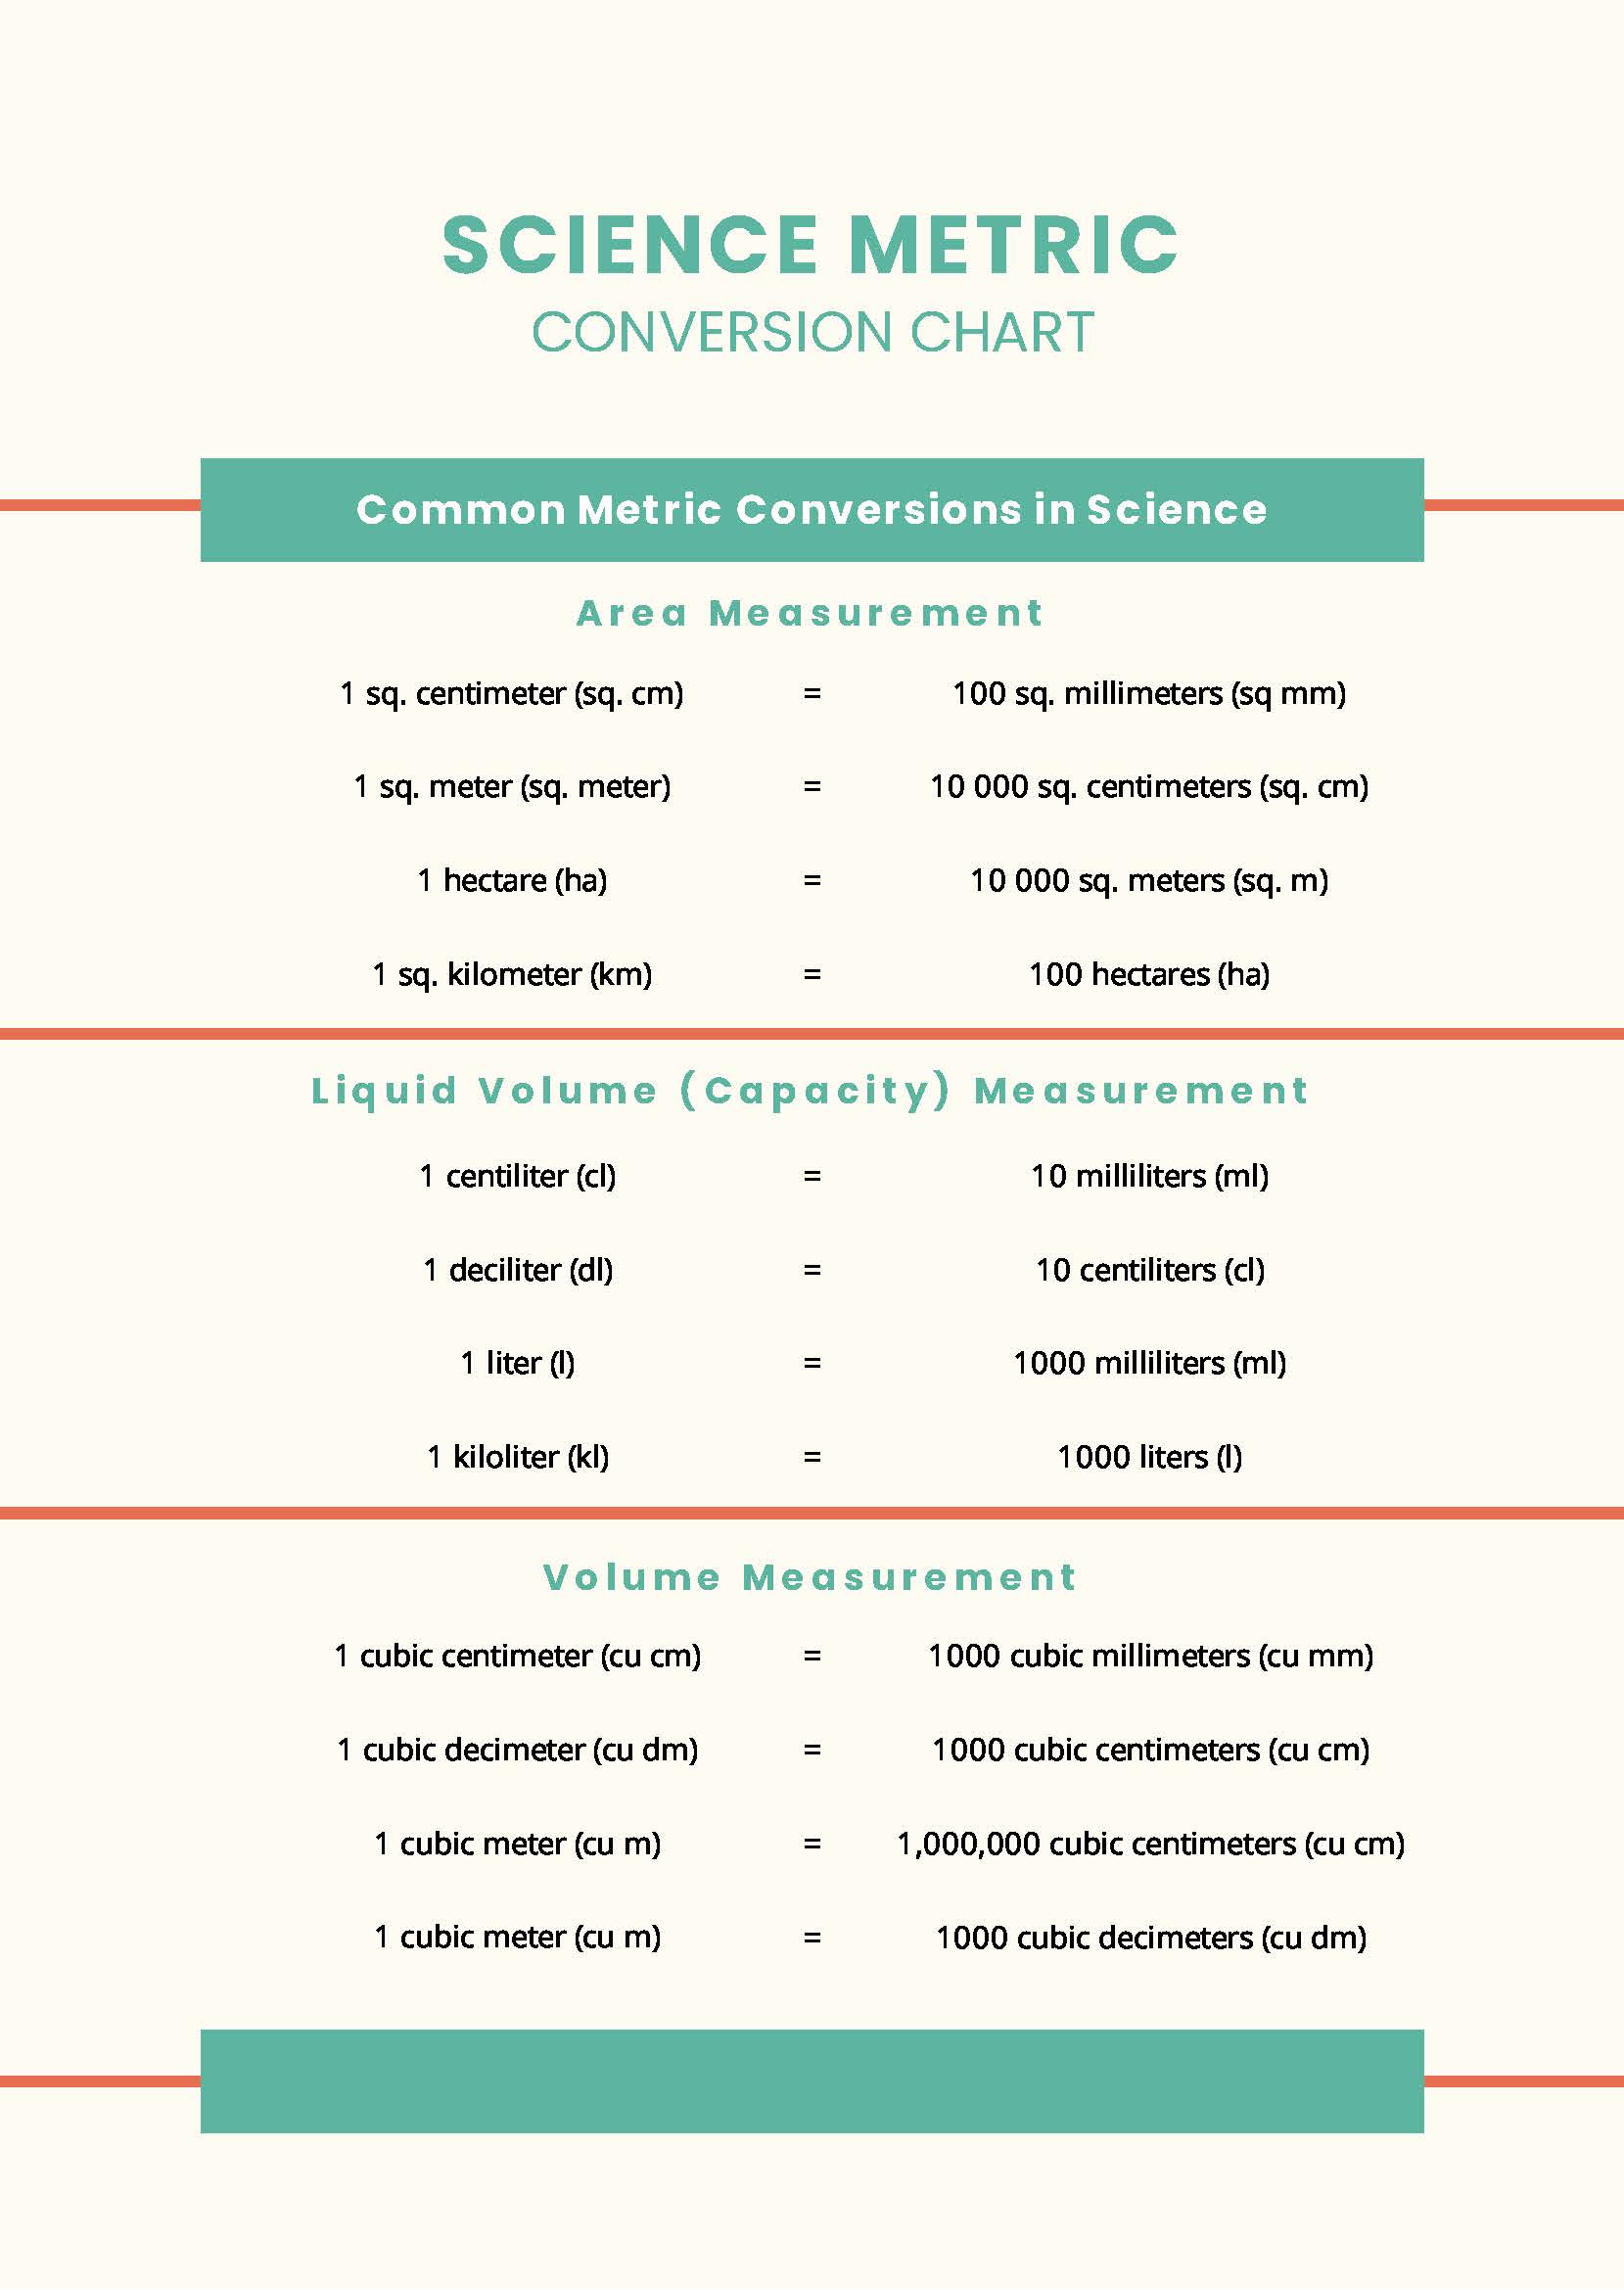 Science Metric Conversion Chart in PDF